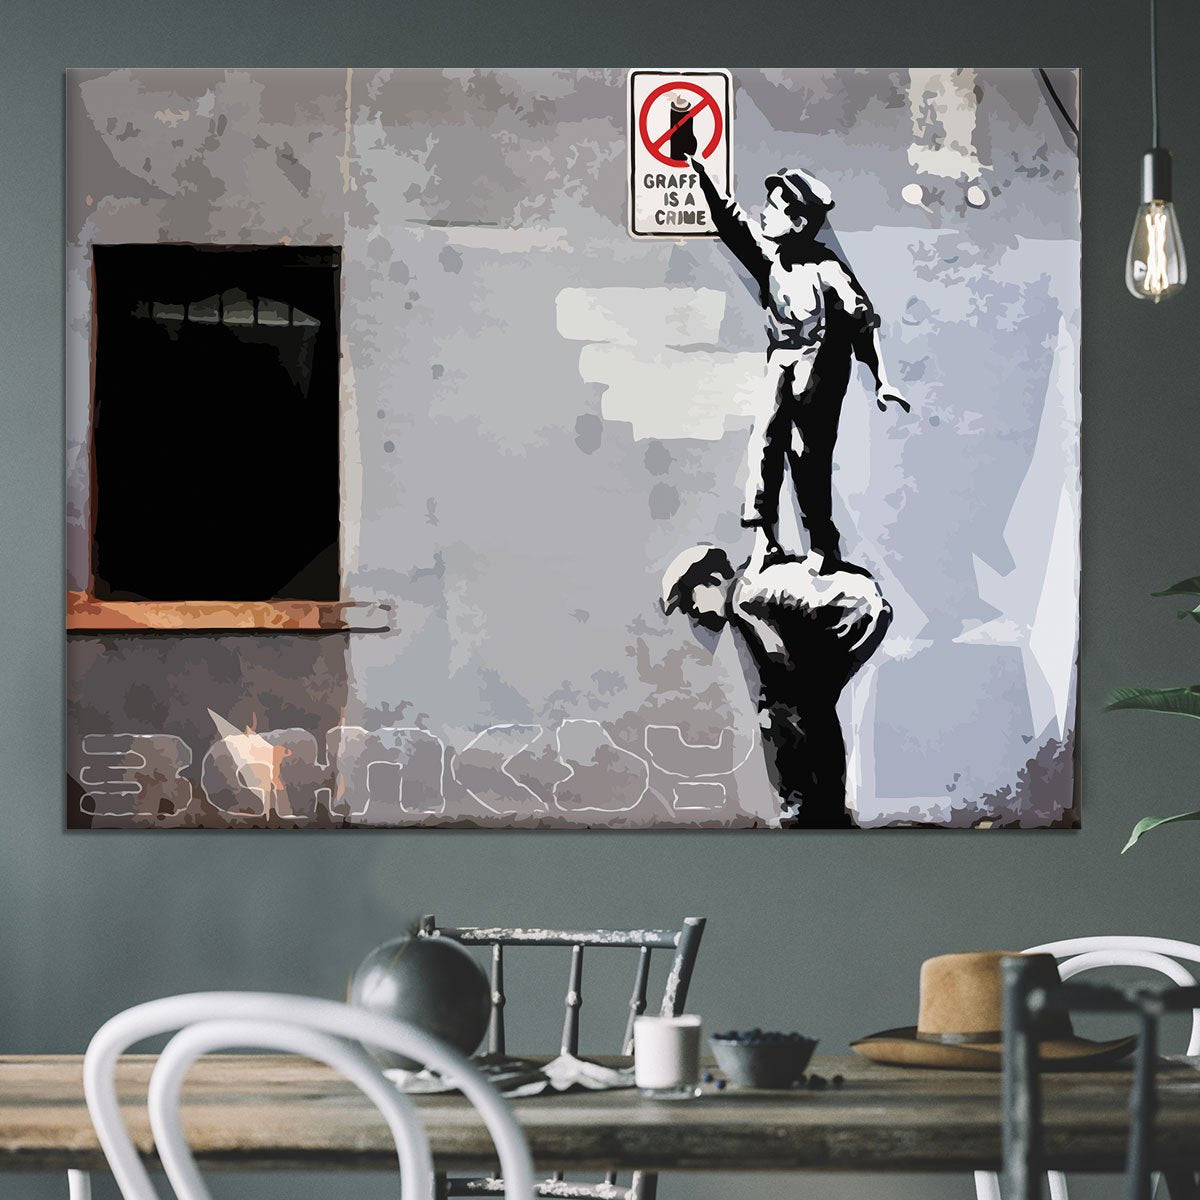 Banksy Graffiti is a Crime New York Canvas Print or Poster